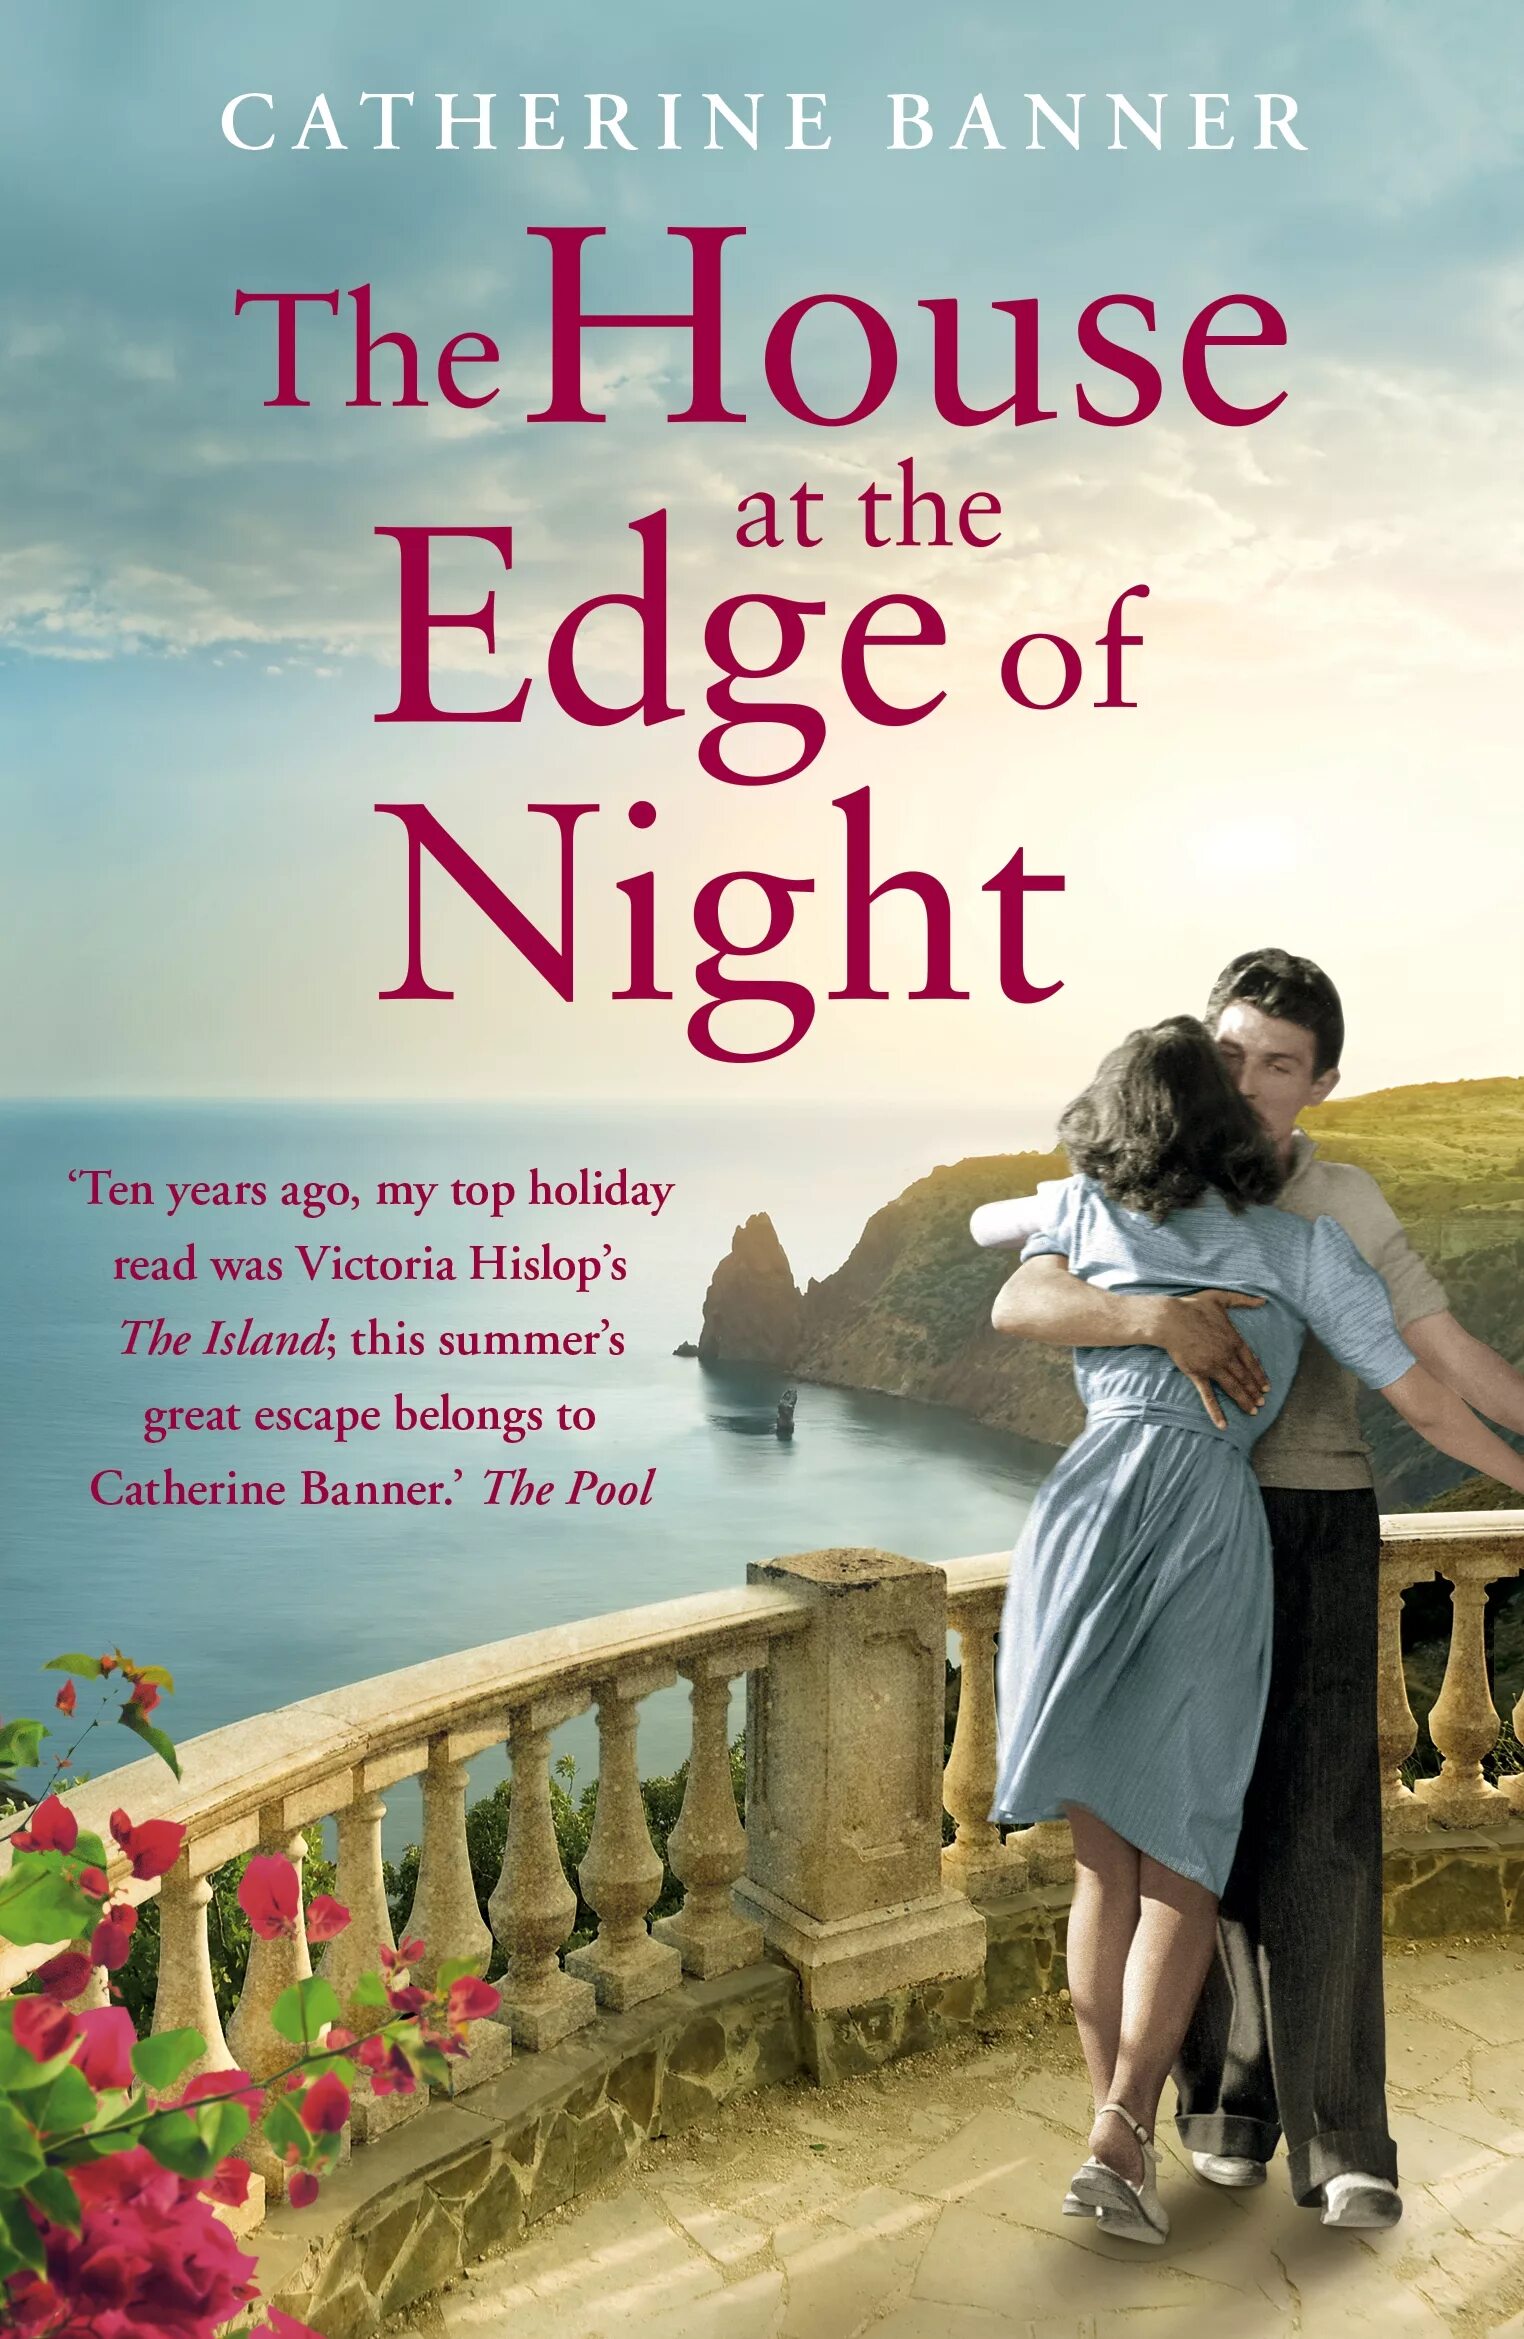 A book to read on holidays. The House at the Edge of Night книга. Кэтрин Бэннер. Кэтрин баннер.